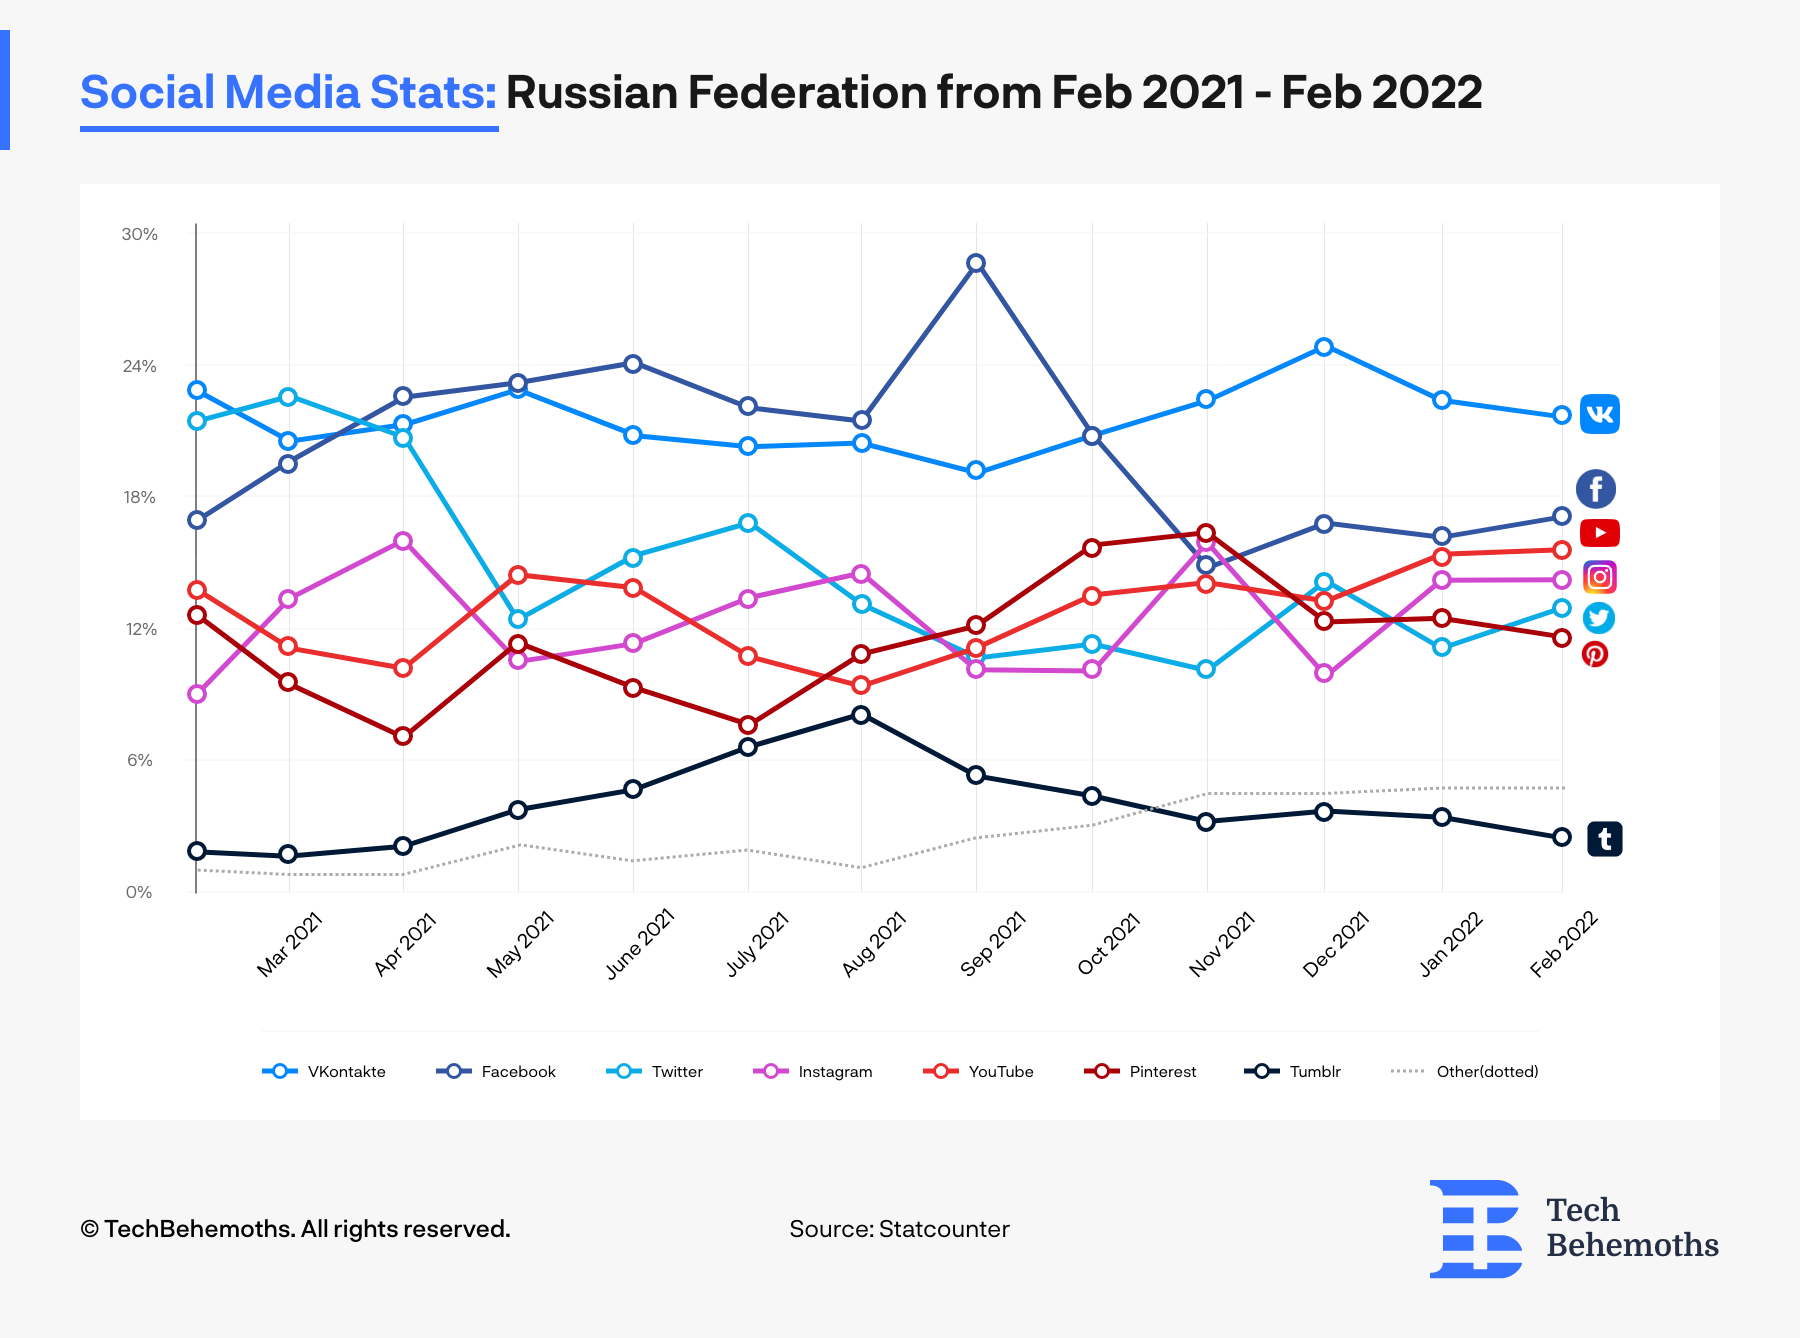 The market share of social media platforms on the russian market between February 2021-February 2022